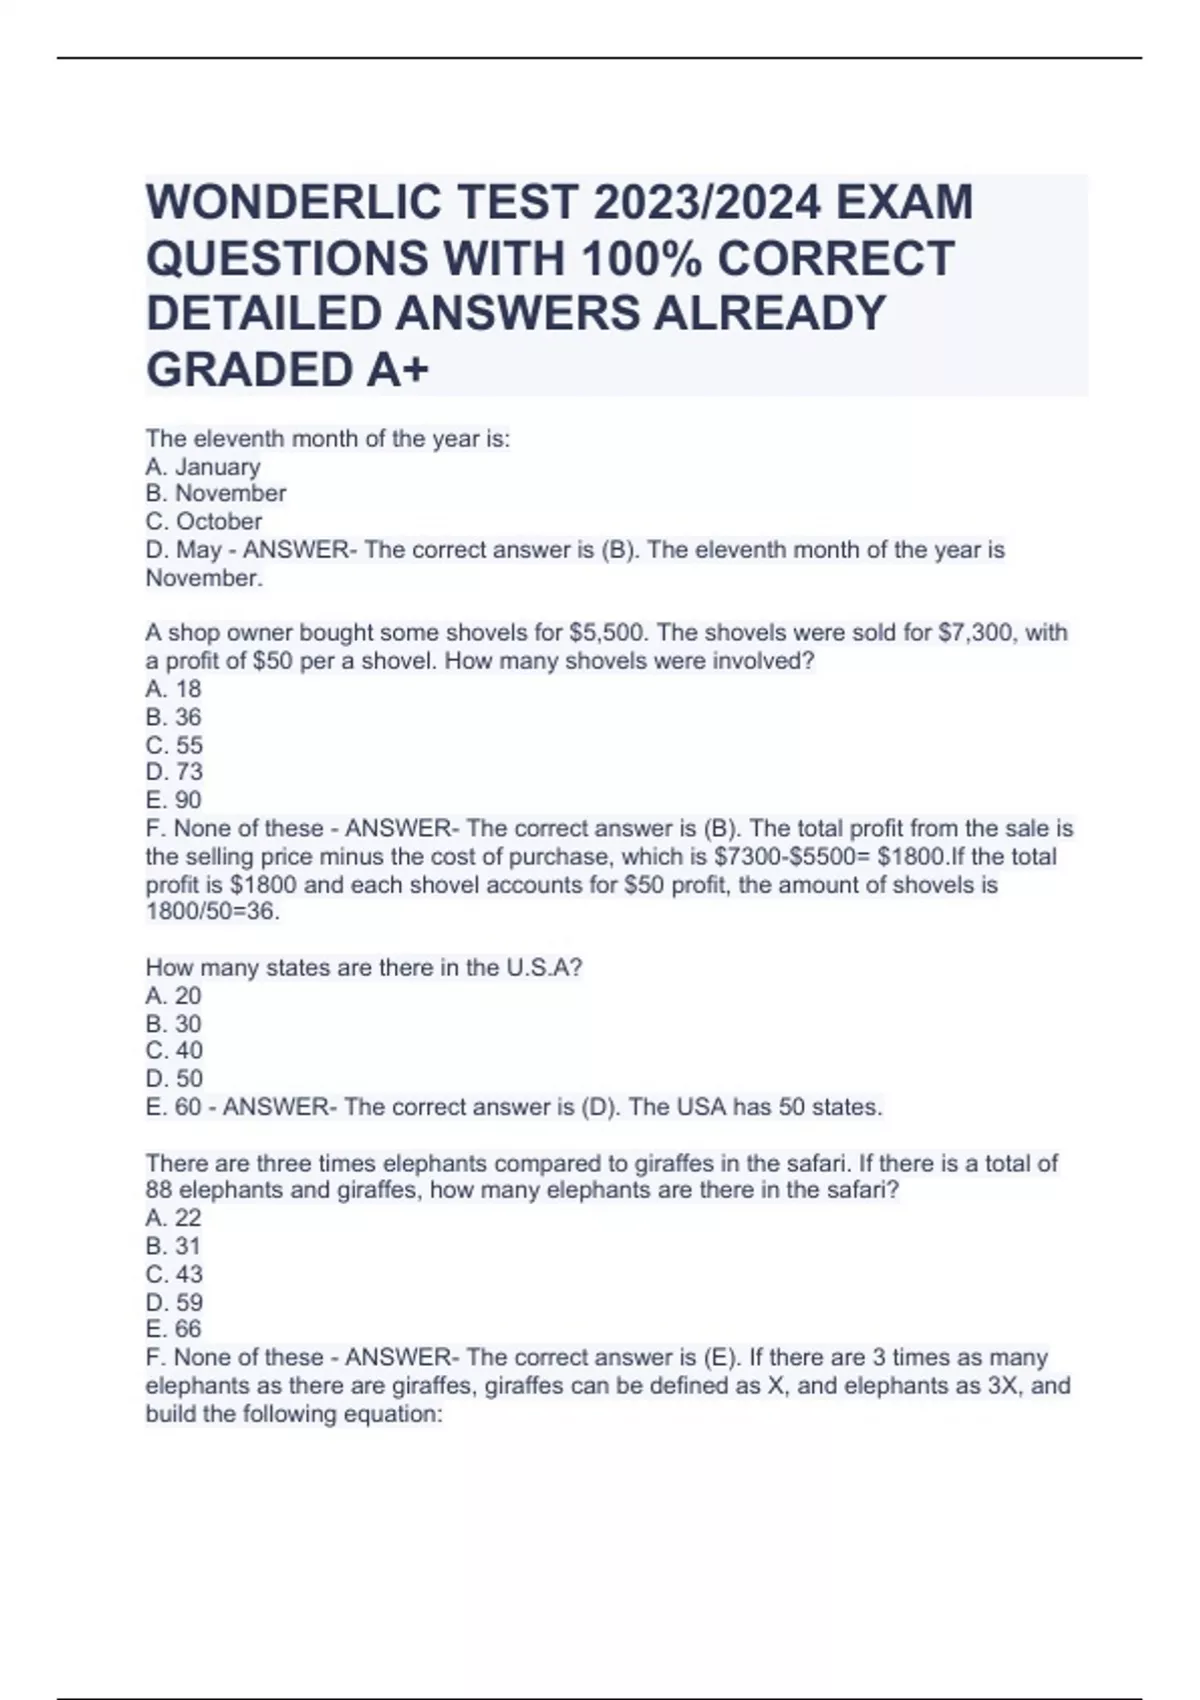 WONDERLIC TEST 2023/2024 EXAM QUESTIONS WITH 100 CORRECT DETAILED